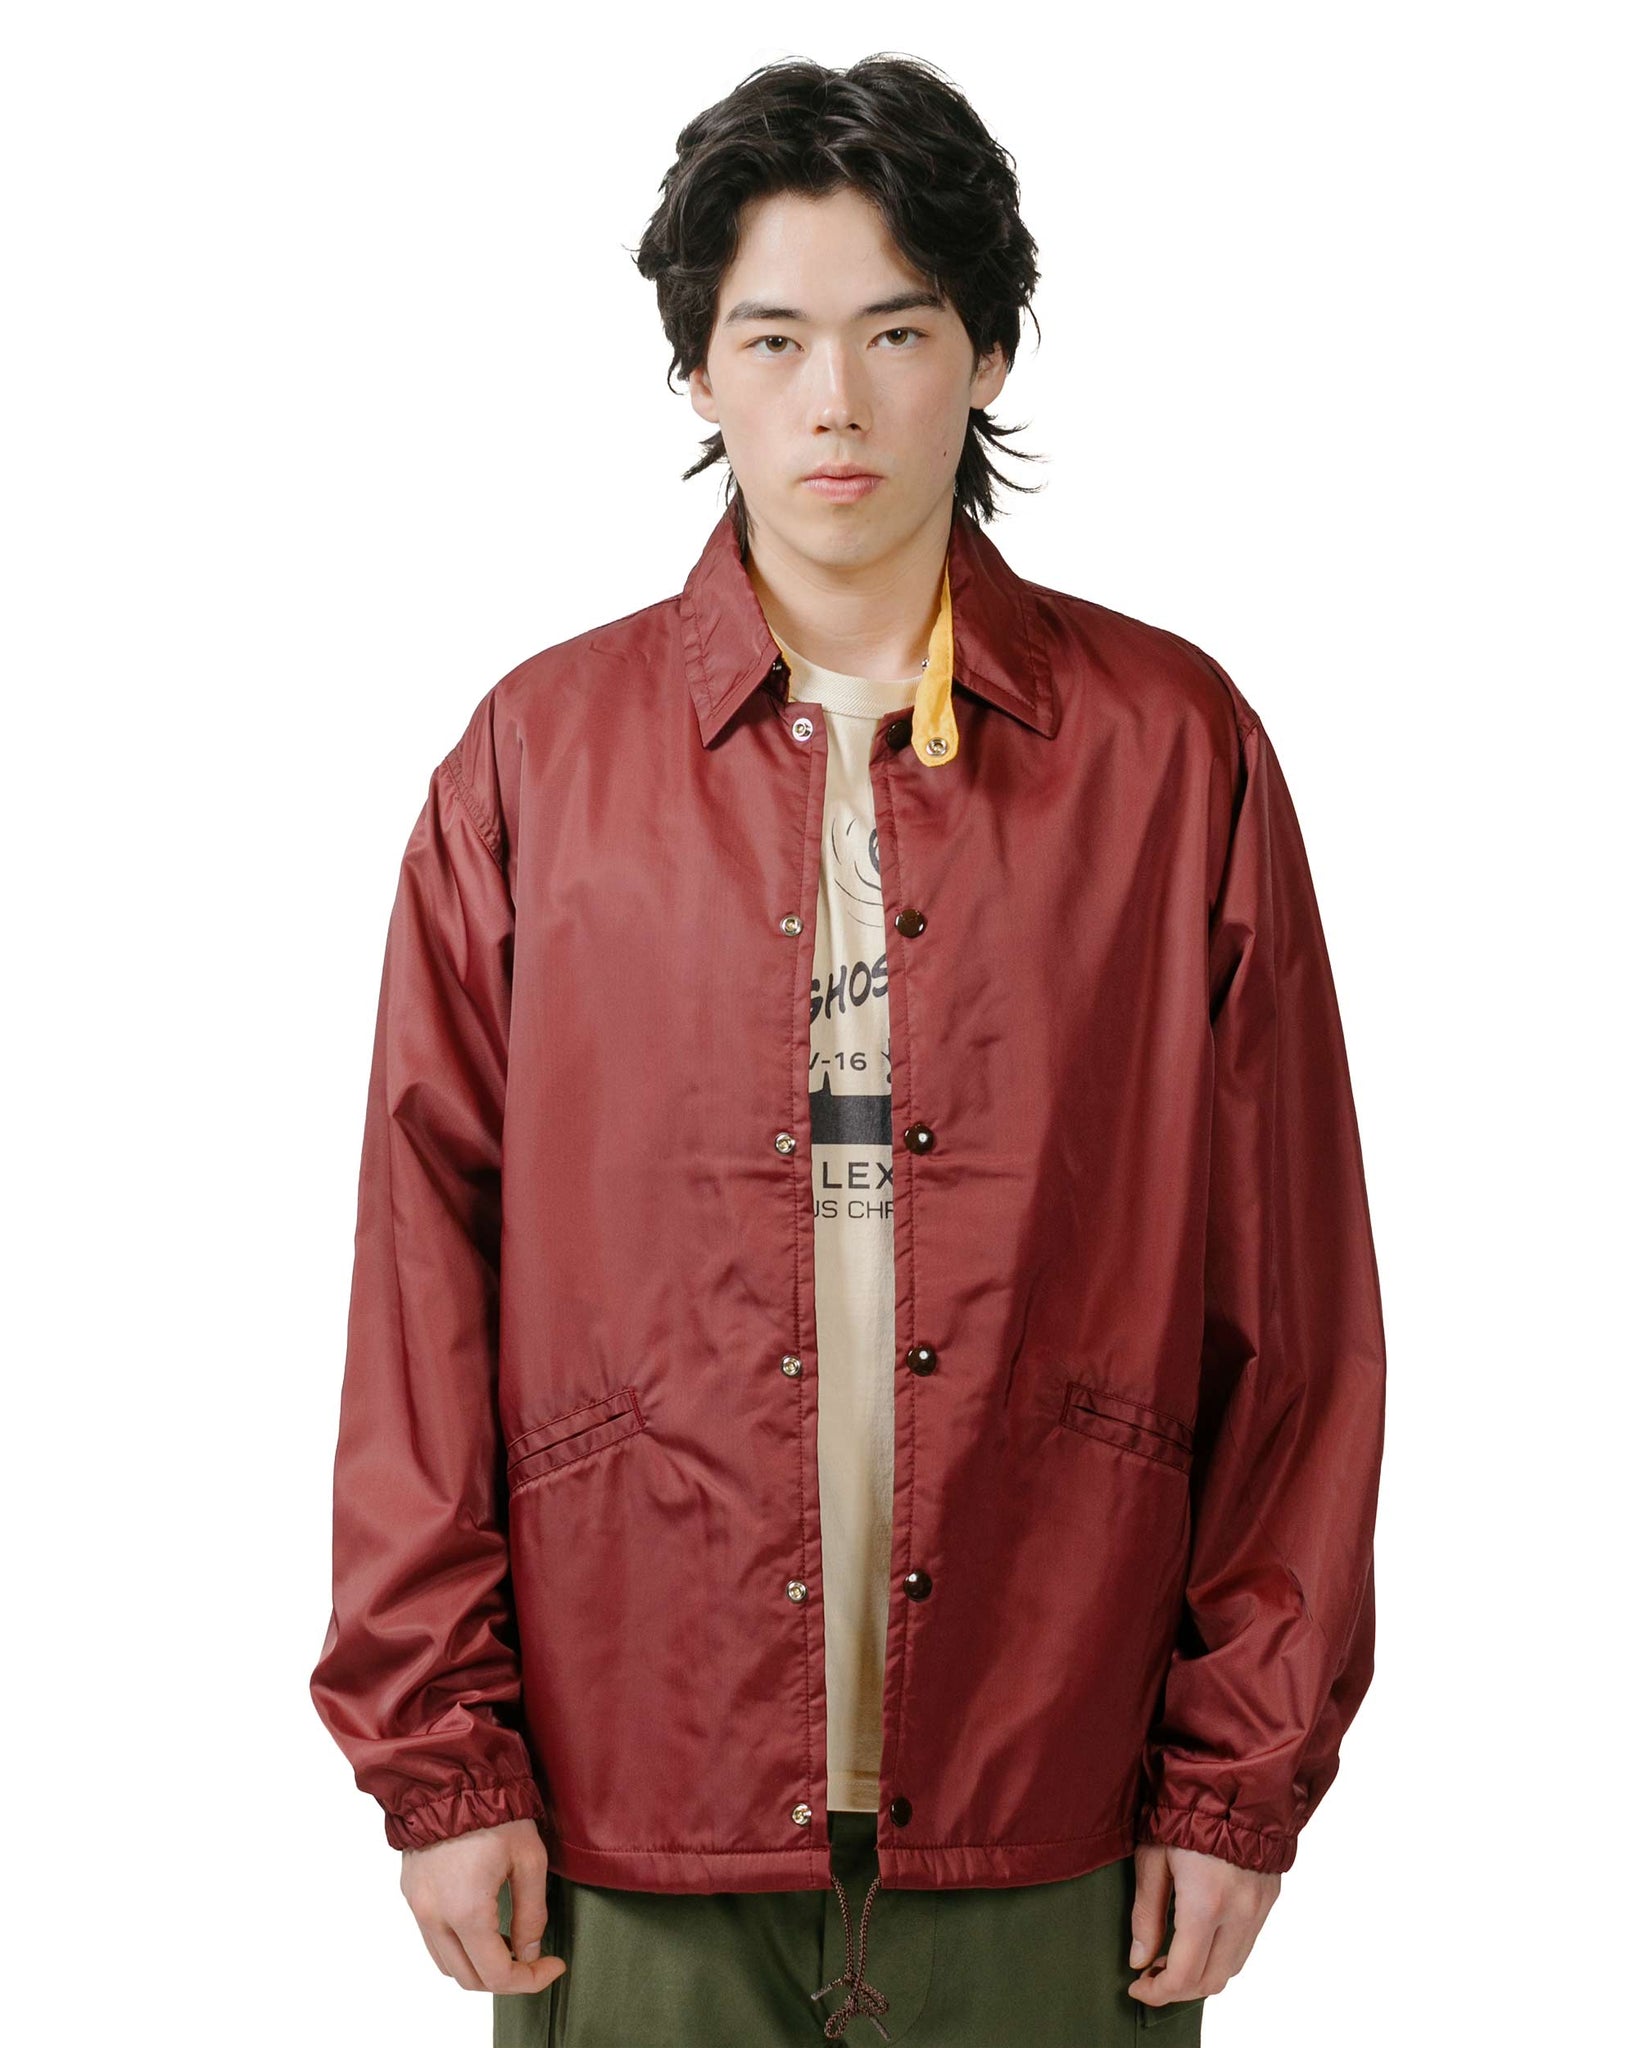 The Real McCoy's MJ24010 Nylon Cotton Lined Coach Jacket Burgundy model front